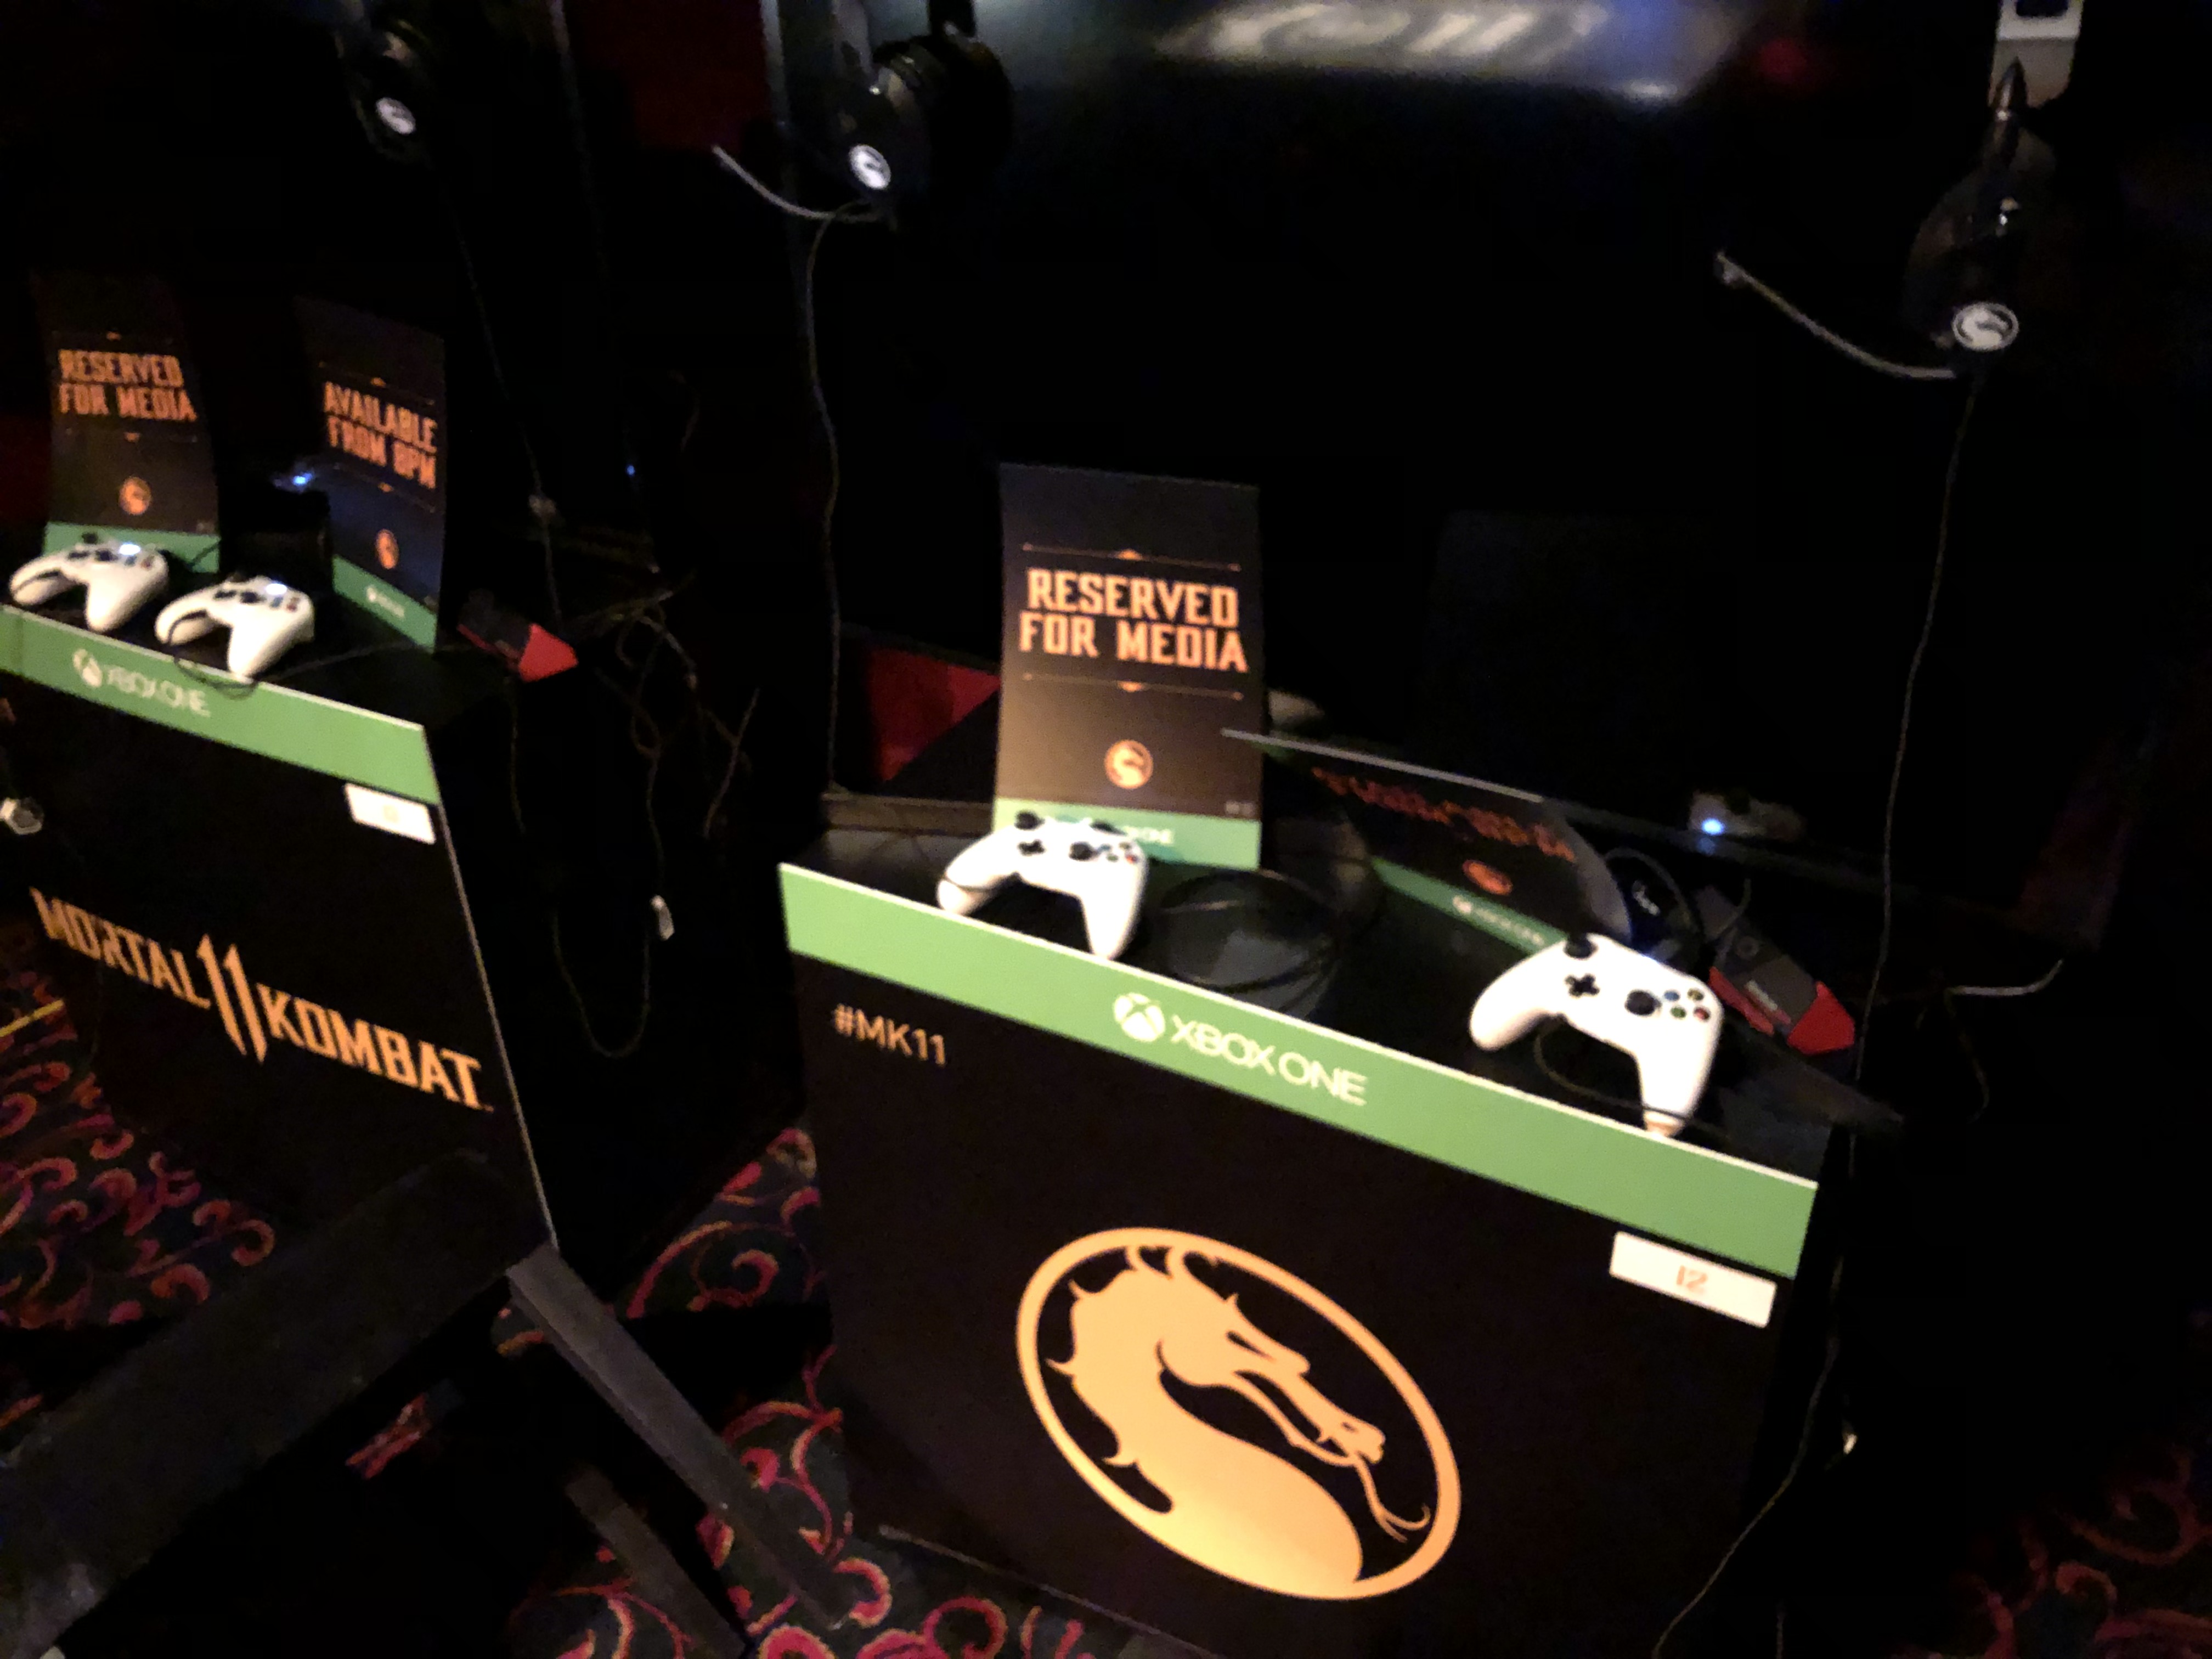 Xboxs for fans to try out Mortal Kombat 11